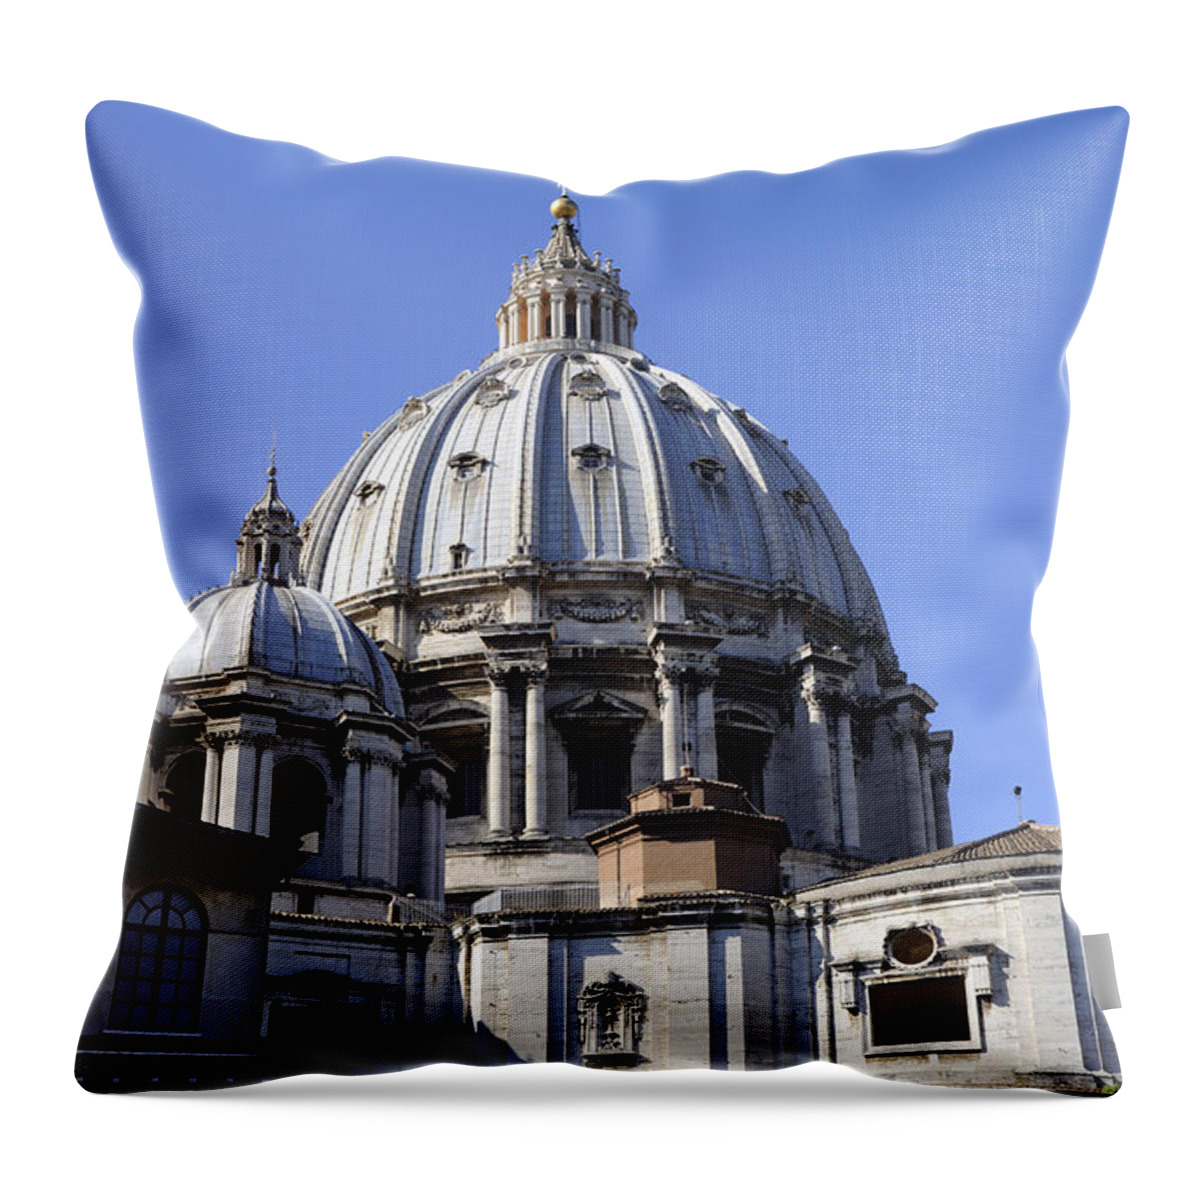 Italy Throw Pillow featuring the photograph Michelangelos Dome by Brenda Kean